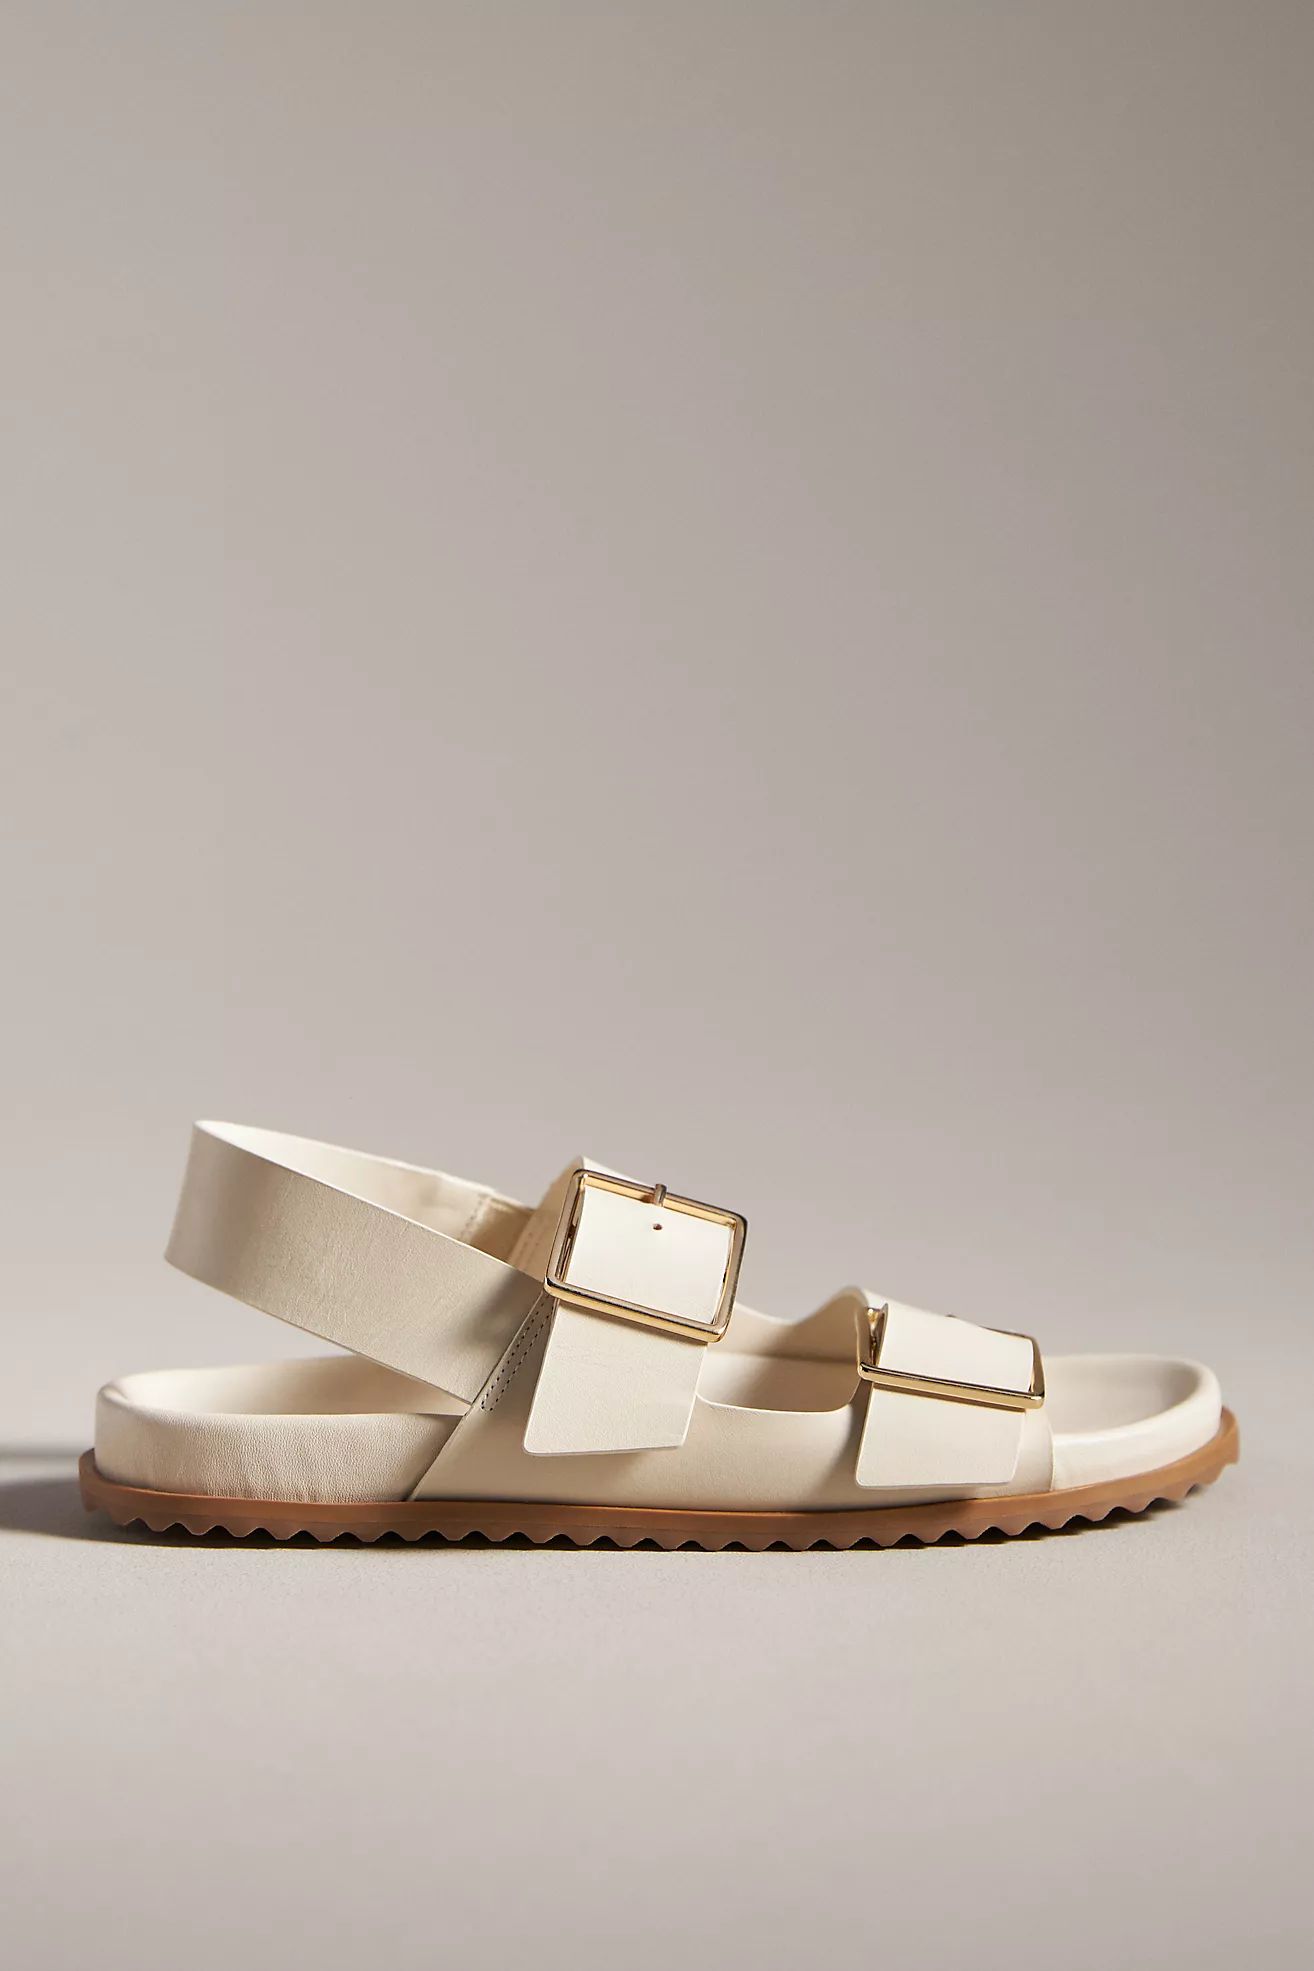 By Anthropologie Square Buckle Slingback Sandals | Anthropologie (US)